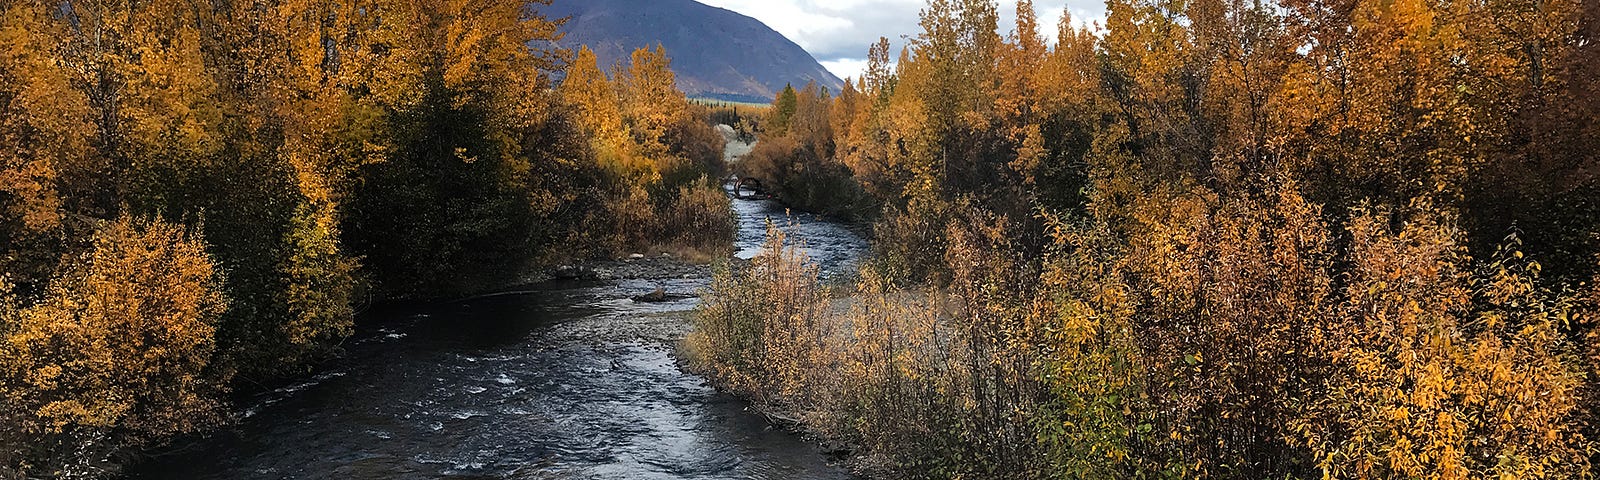 a river surrounded by fall leaves with a mountain downstream